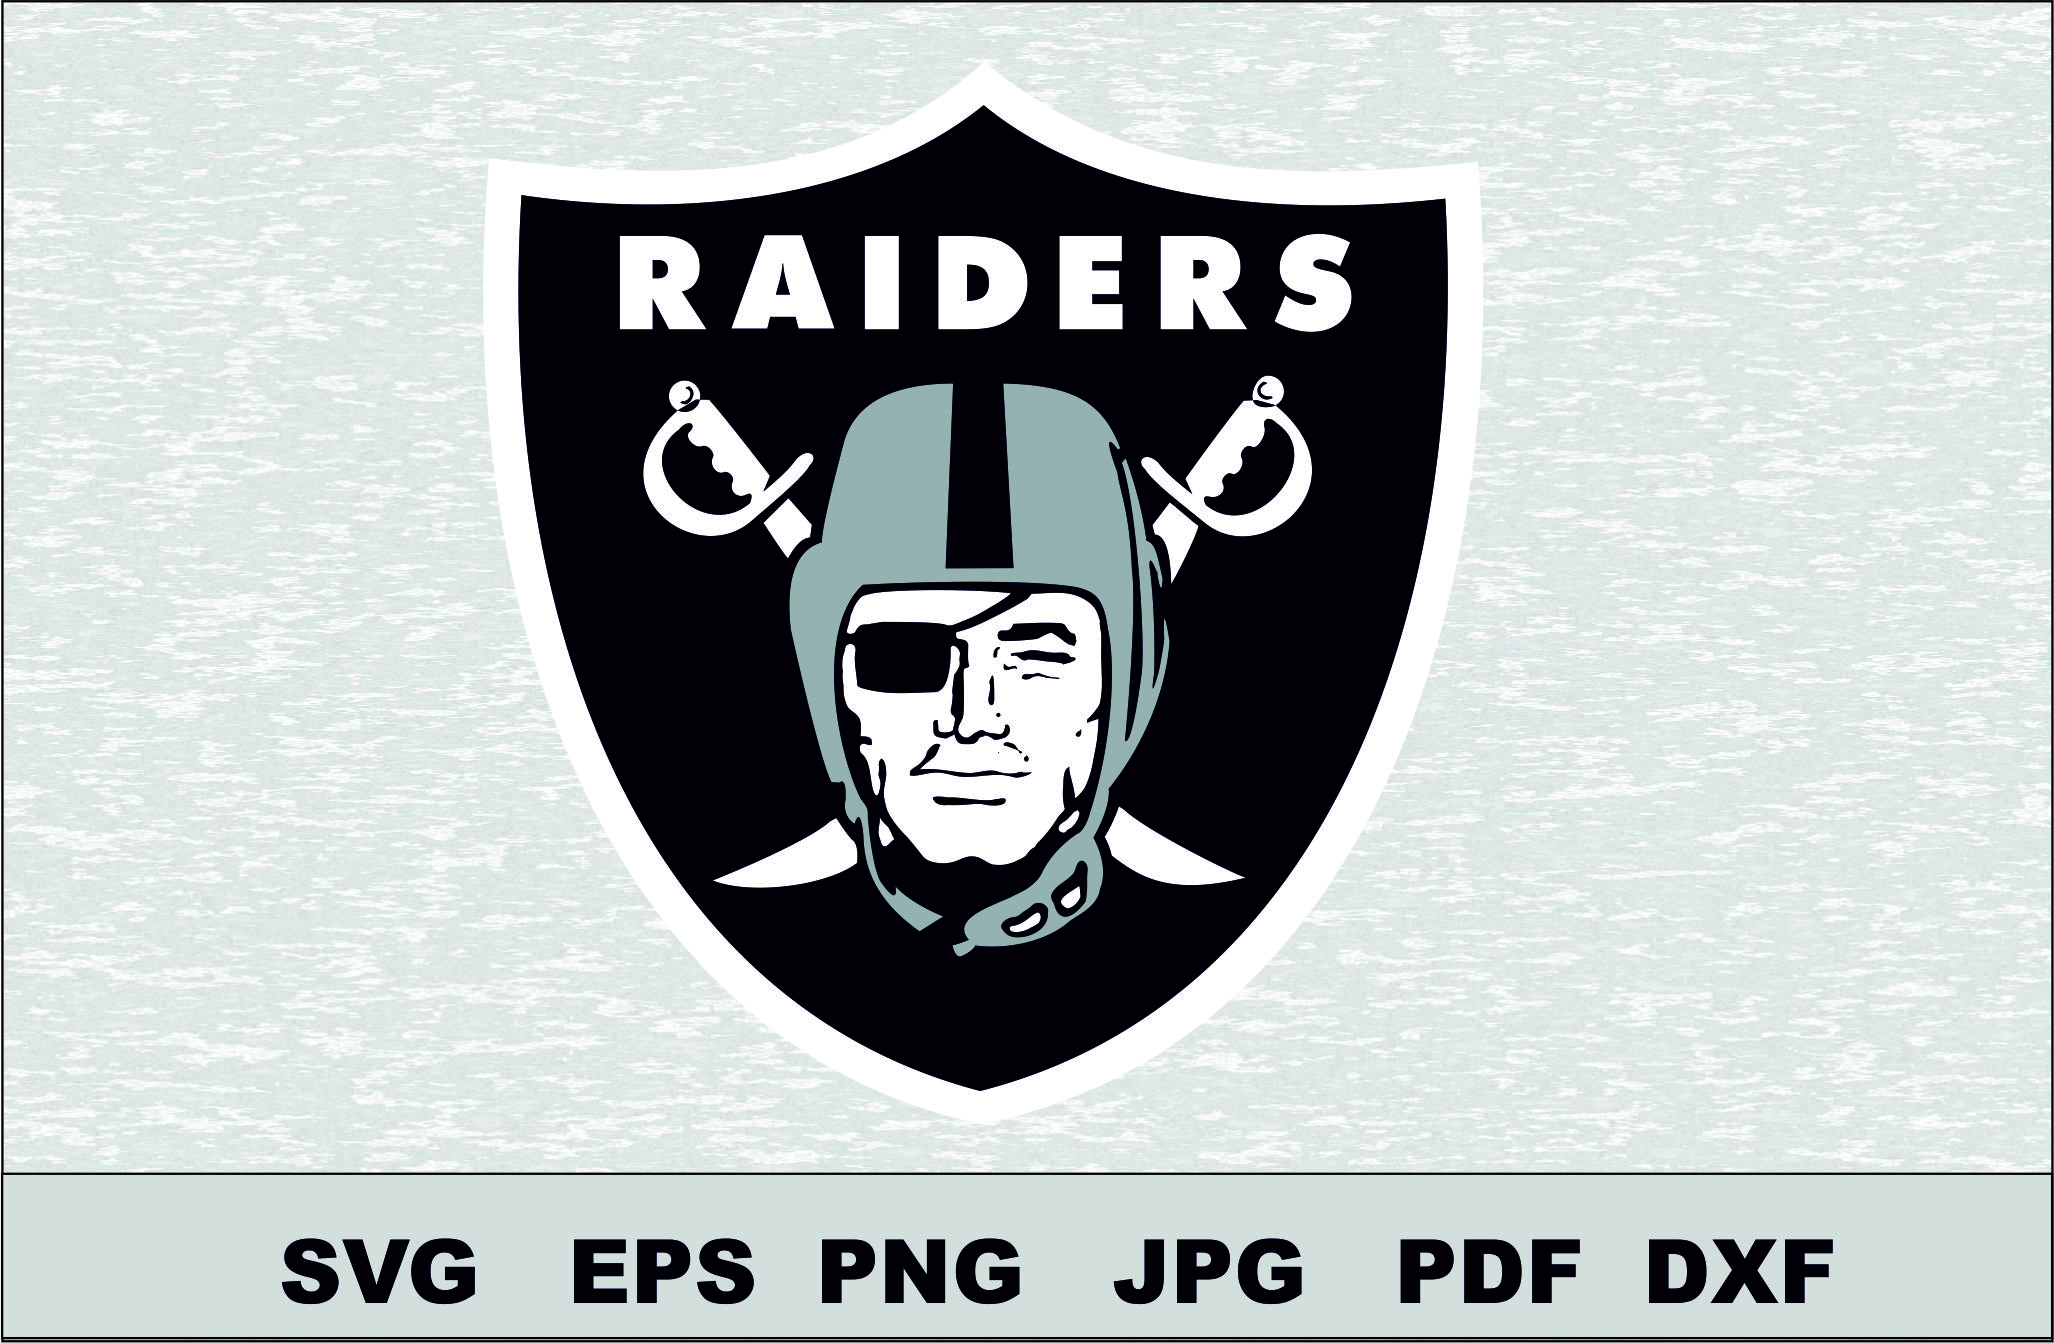 Download Free Oakland Raiders Svg Logo Silhouette Studio Transfer Iron On Cut File Cameo Cricut Iron On Decal Vinyl Decal Layered Vector PSD Mockup Template